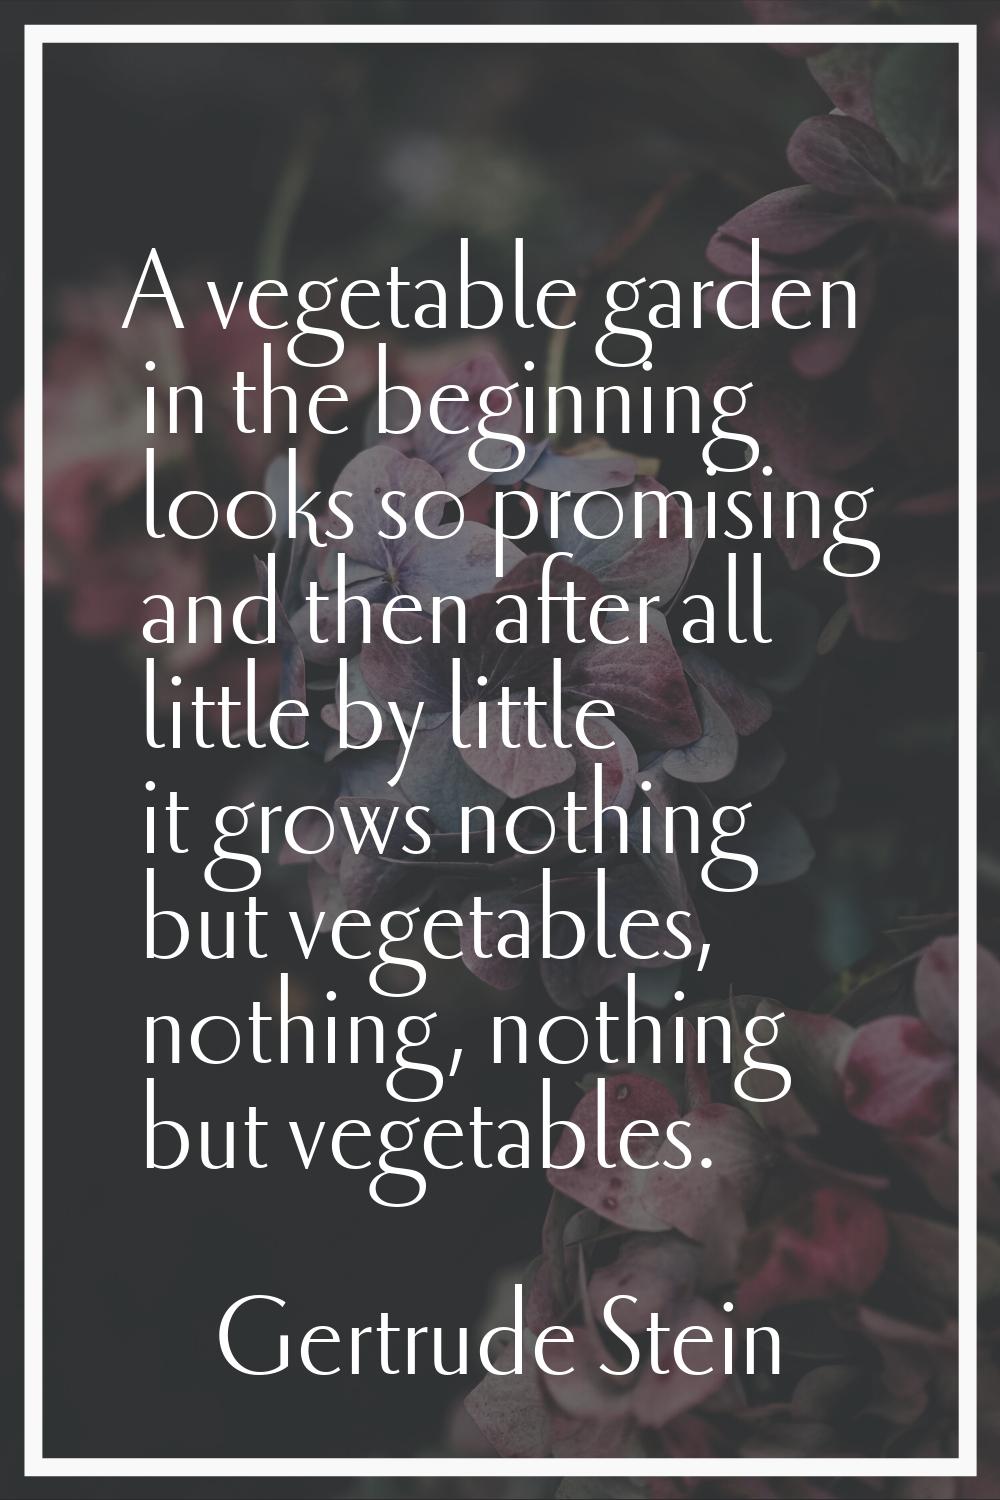 A vegetable garden in the beginning looks so promising and then after all little by little it grows